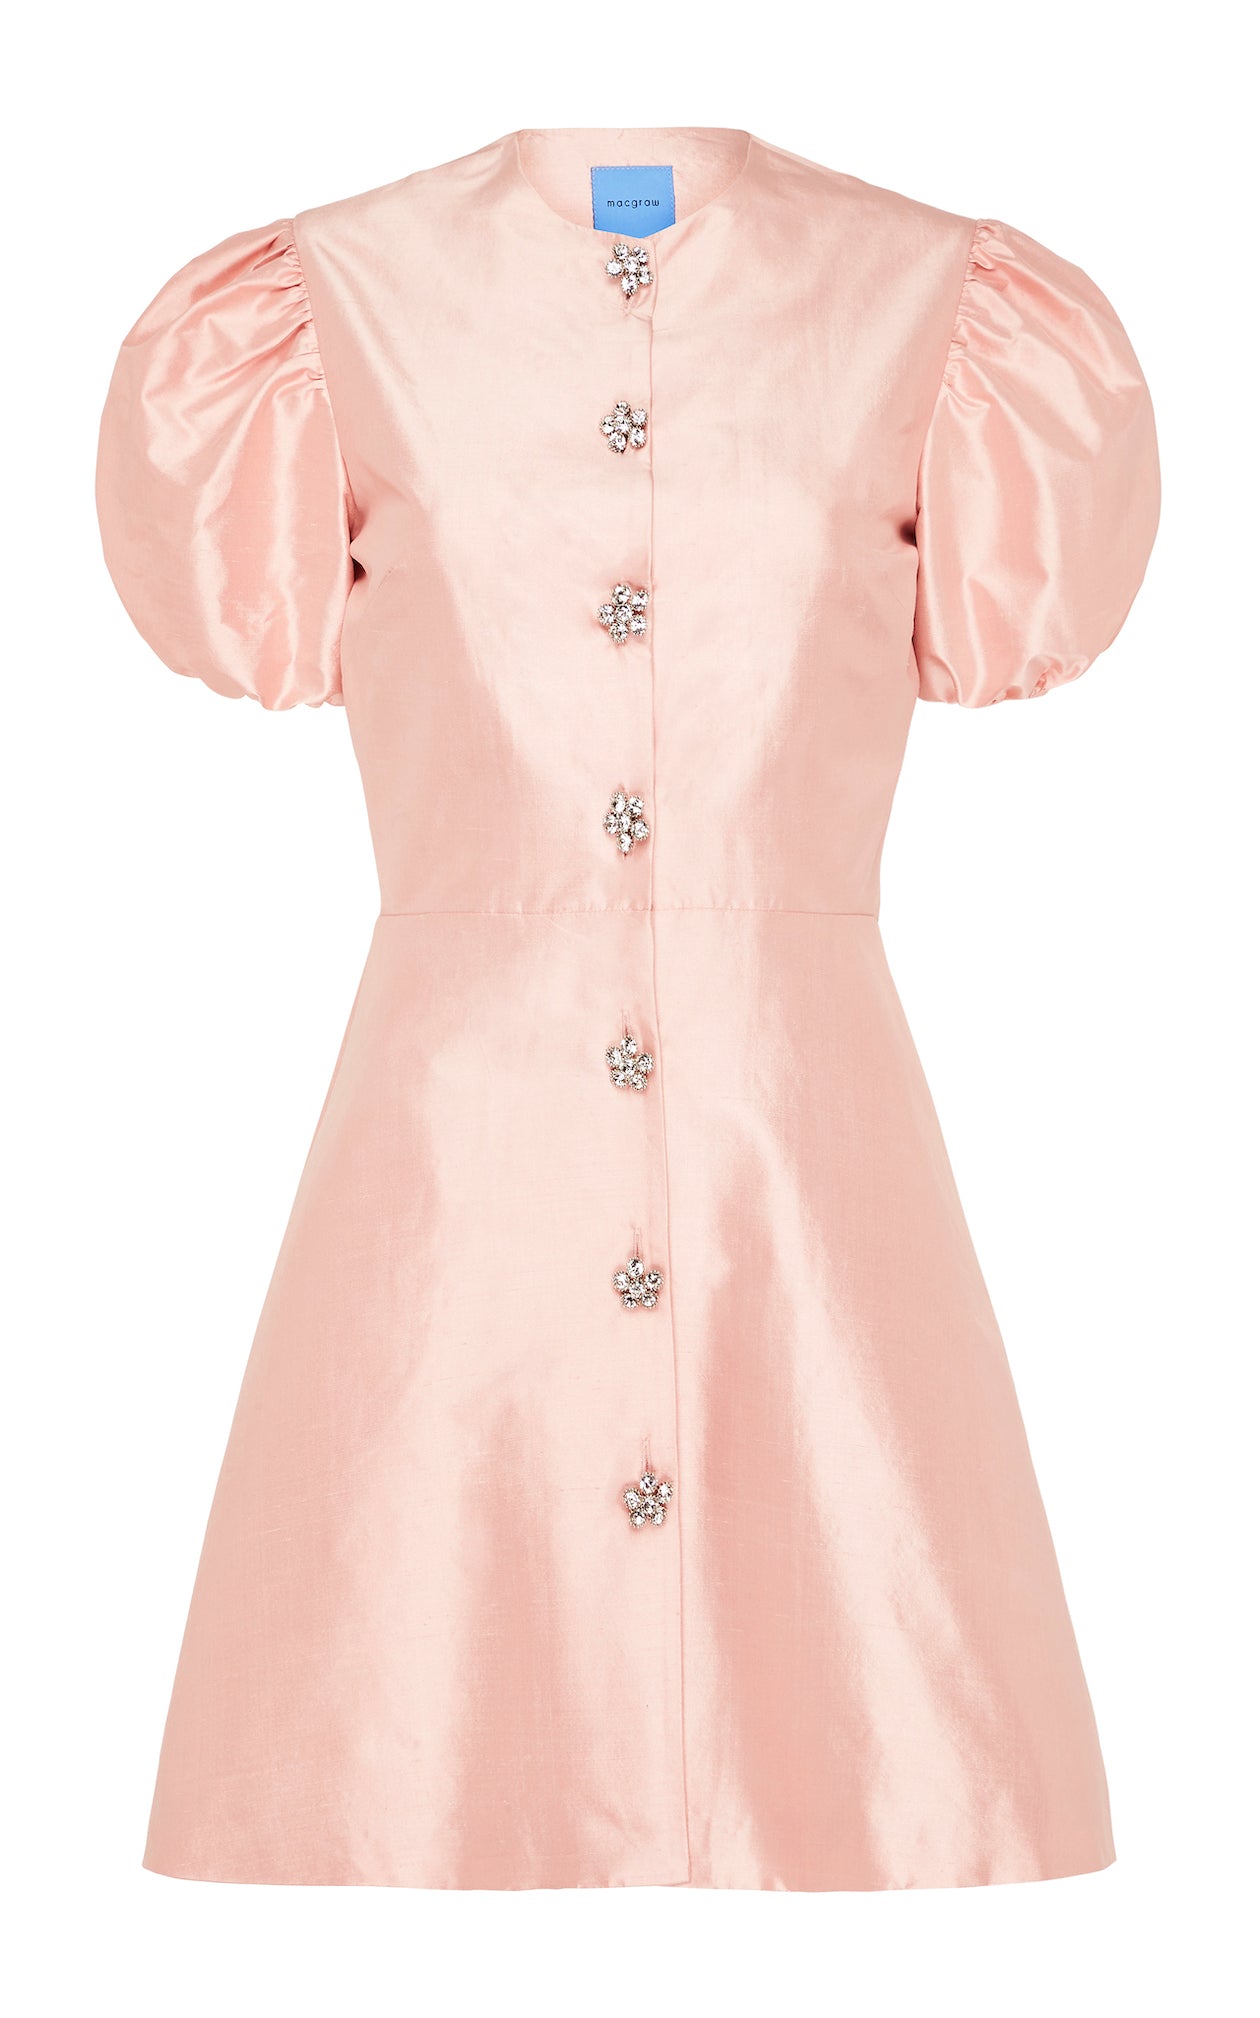 Sorbet Dress in pink by macgraw